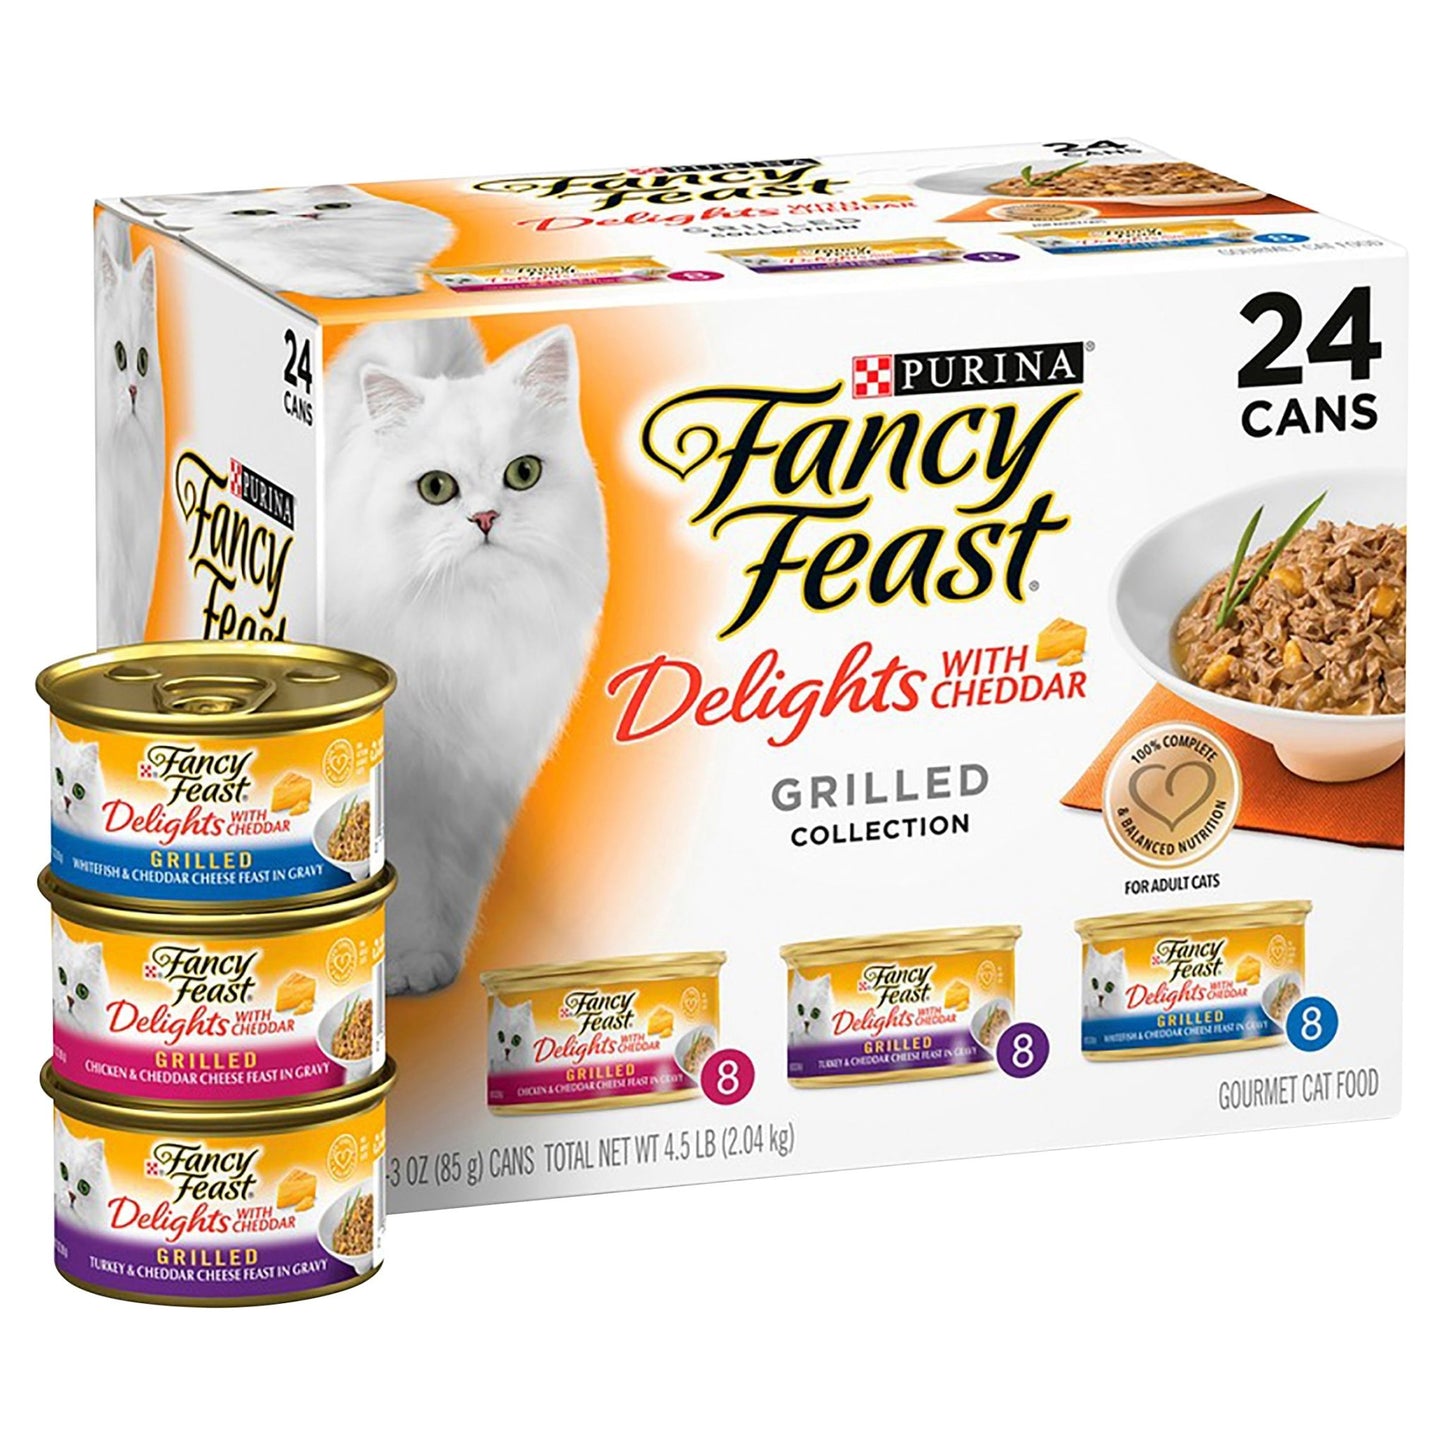 Fancy Feast Grilled Cheddar Delights Variety 85gx24 - Woonona Petfood & Produce